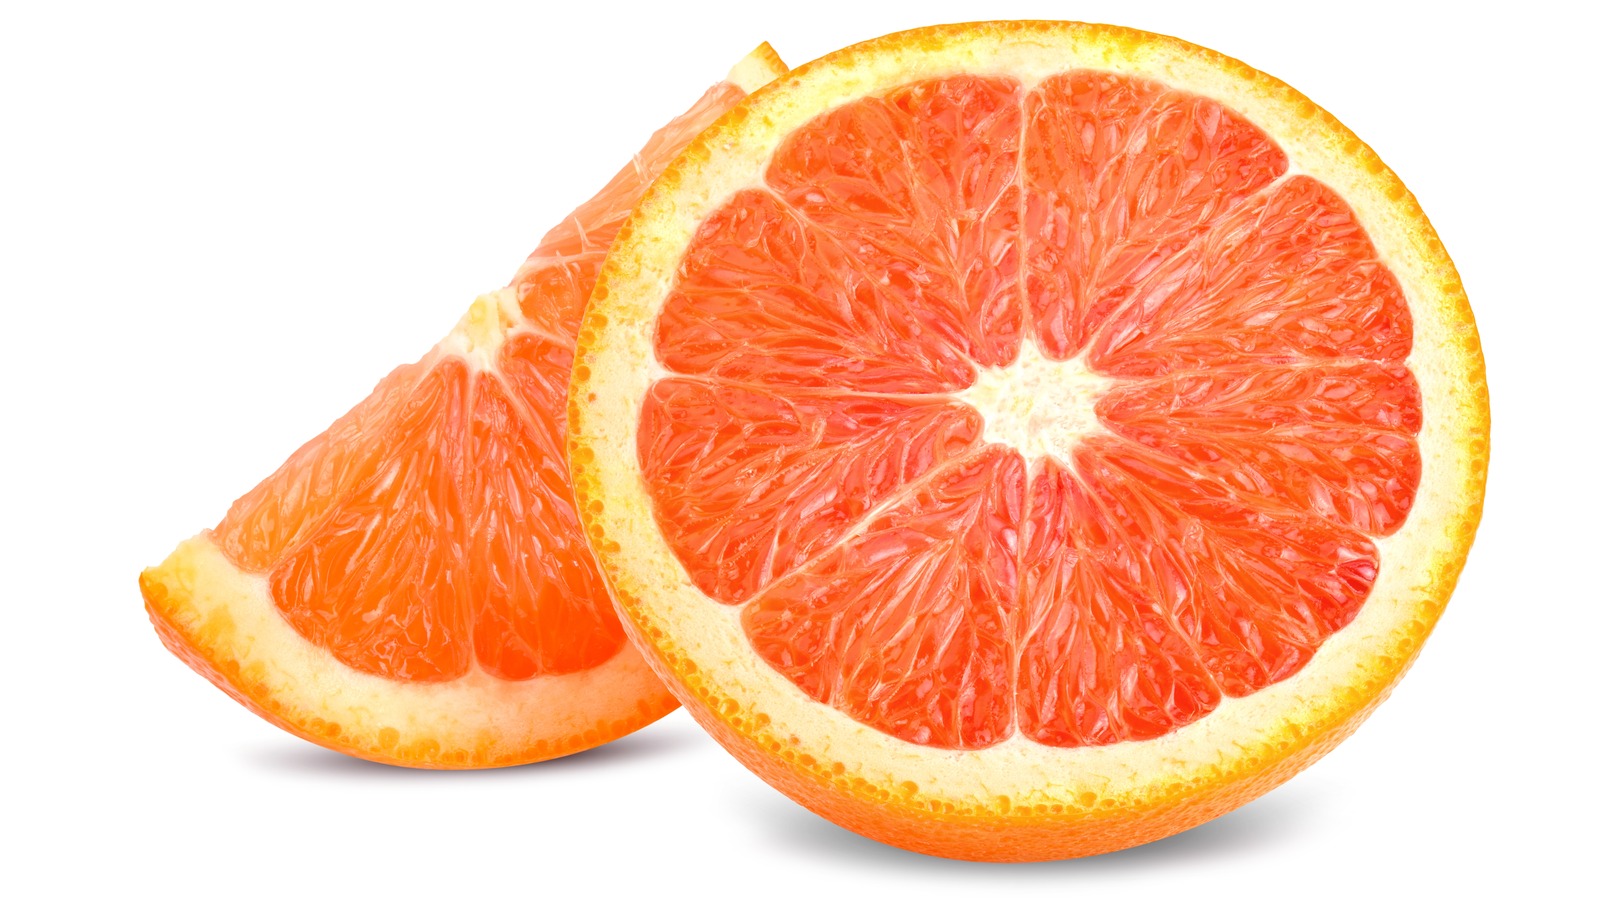 https://www.tastingtable.com/img/gallery/cara-cara-oranges-the-colorful-variety-that-packs-a-sweet-punch/l-intro-1674487132.jpg